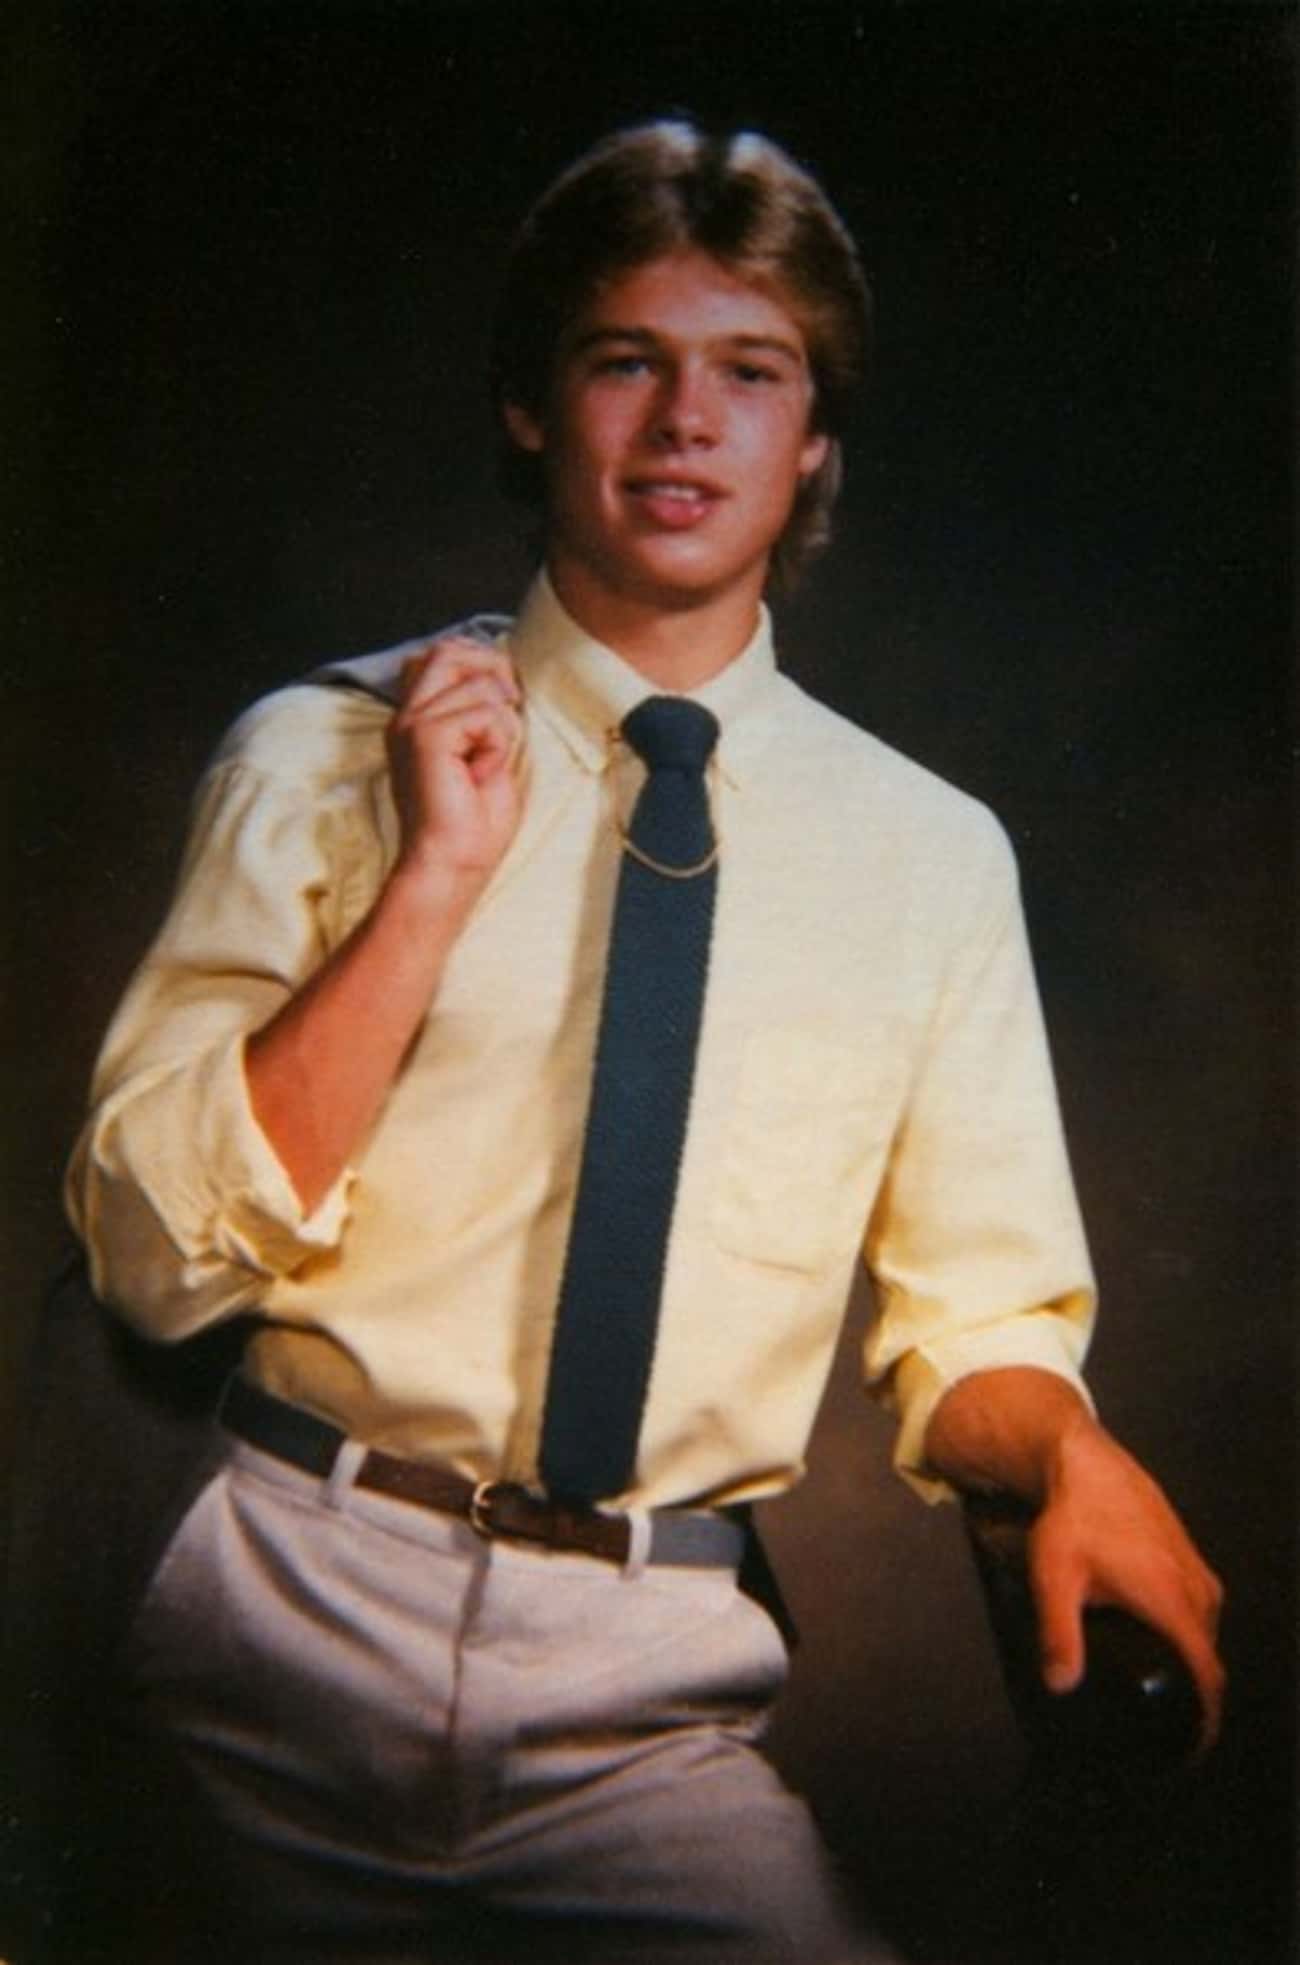 Young Brad Pitt: Real Estate Agent